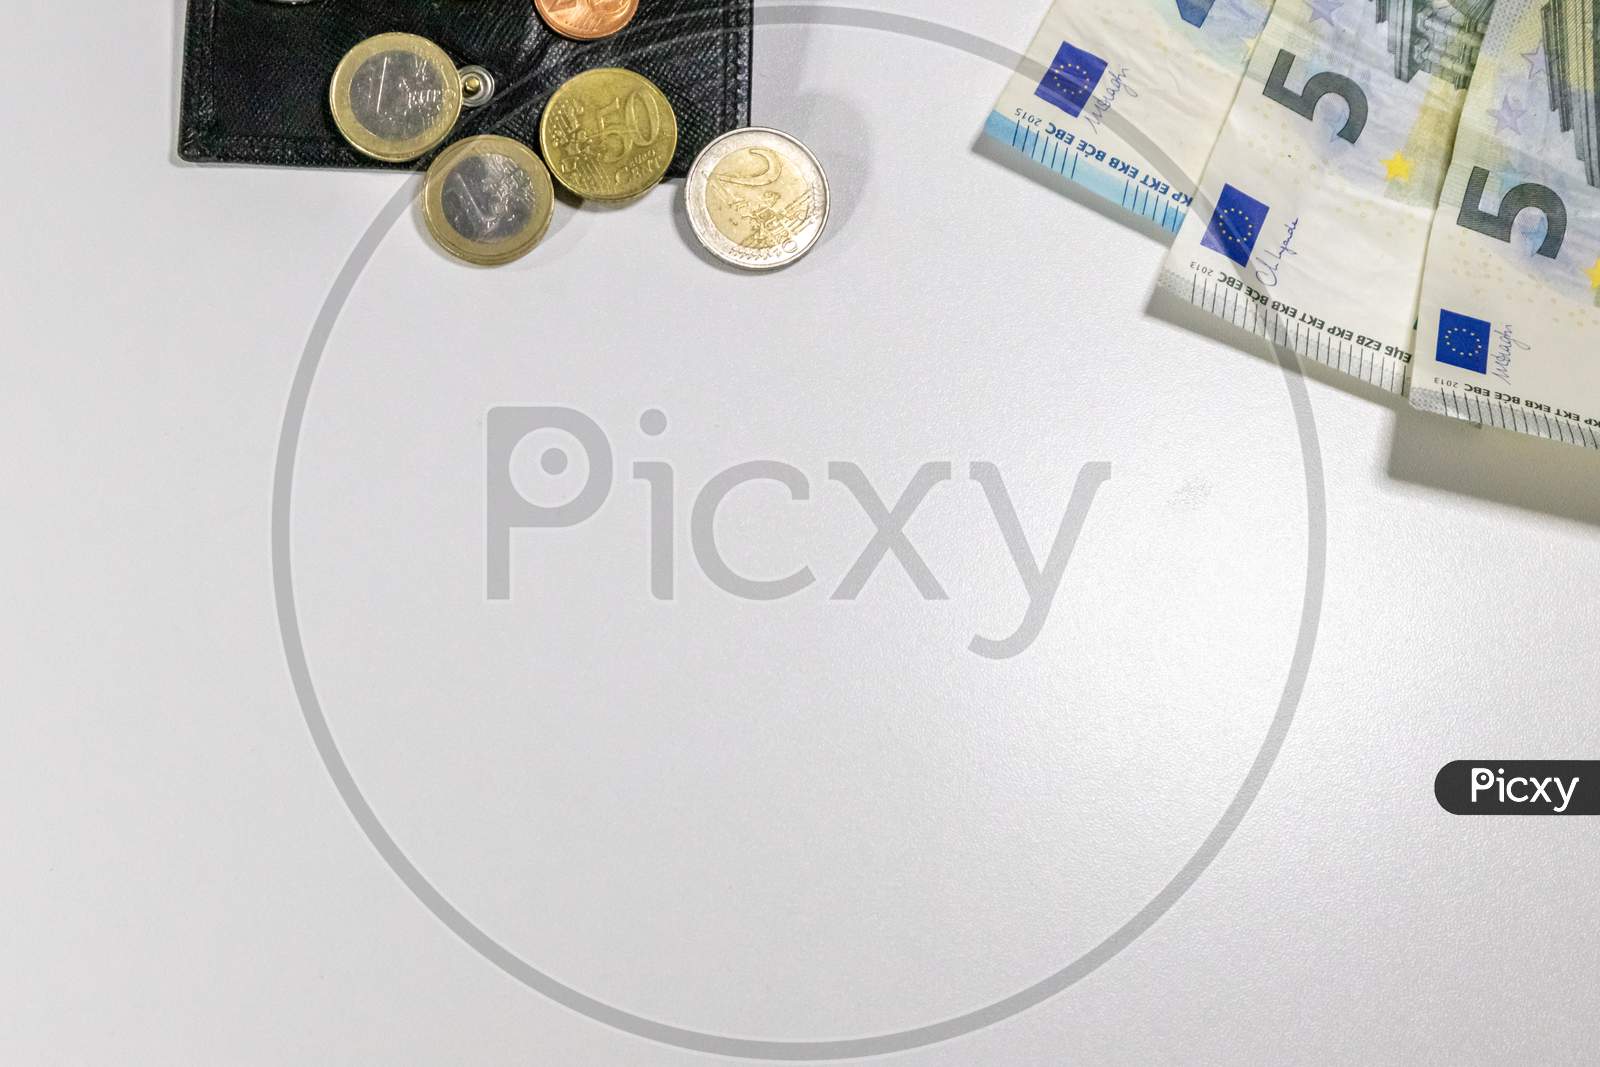 European money with black wallet on white desk as white background with different euro coins and euro bank notes poverty investment financial management and income business plans need for housekeeping